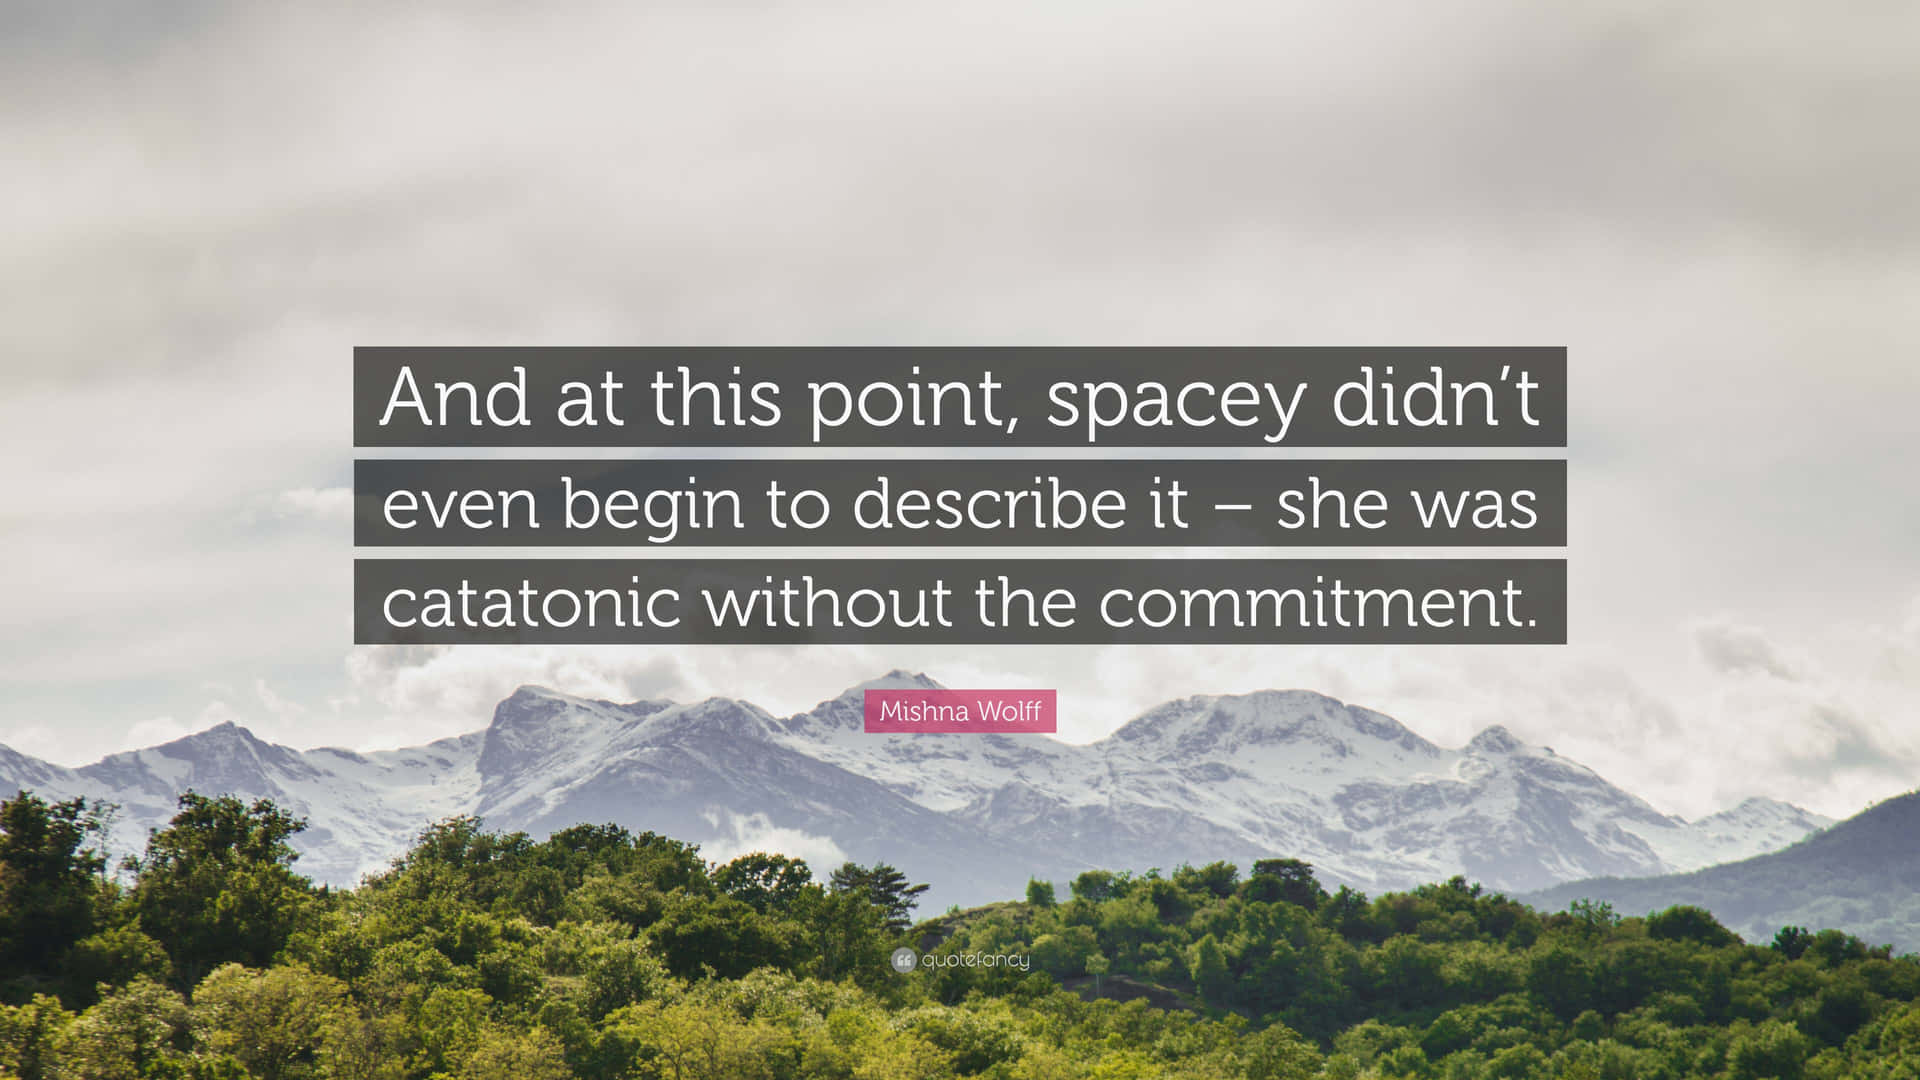 A Quote About Space And This Point Space Didn't Even Begin To Describe It She Catalytic